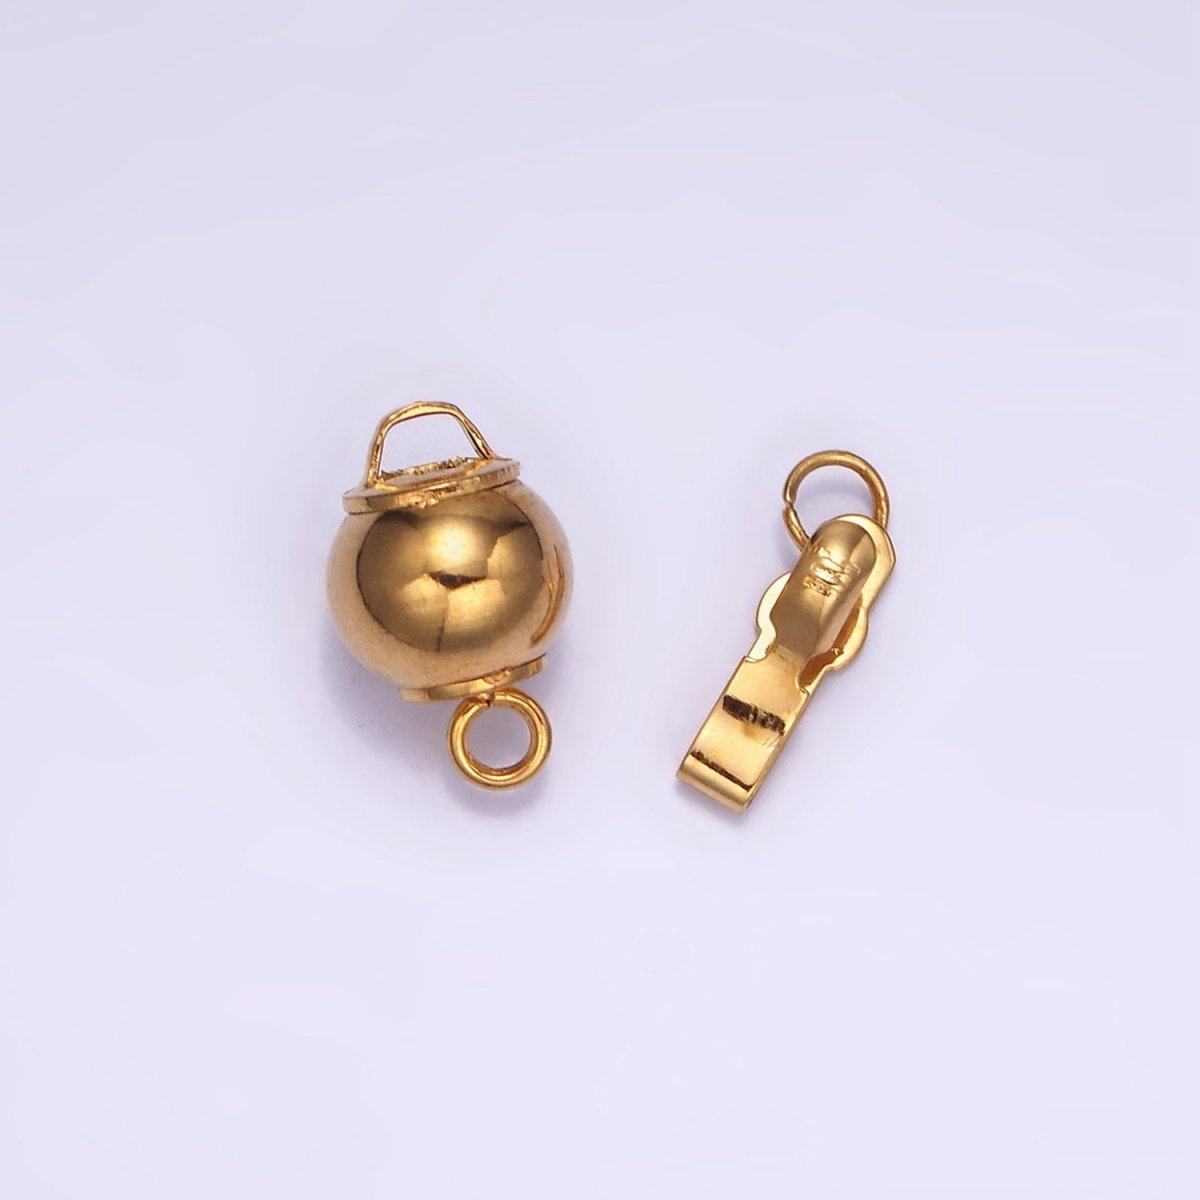 Gold Stainless Steel Ball Clasp with Ring for Necklace Bracelet Jewelry Making Smooth Ball Closure Connector Push in Lock End Clasp Z662 - DLUXCA